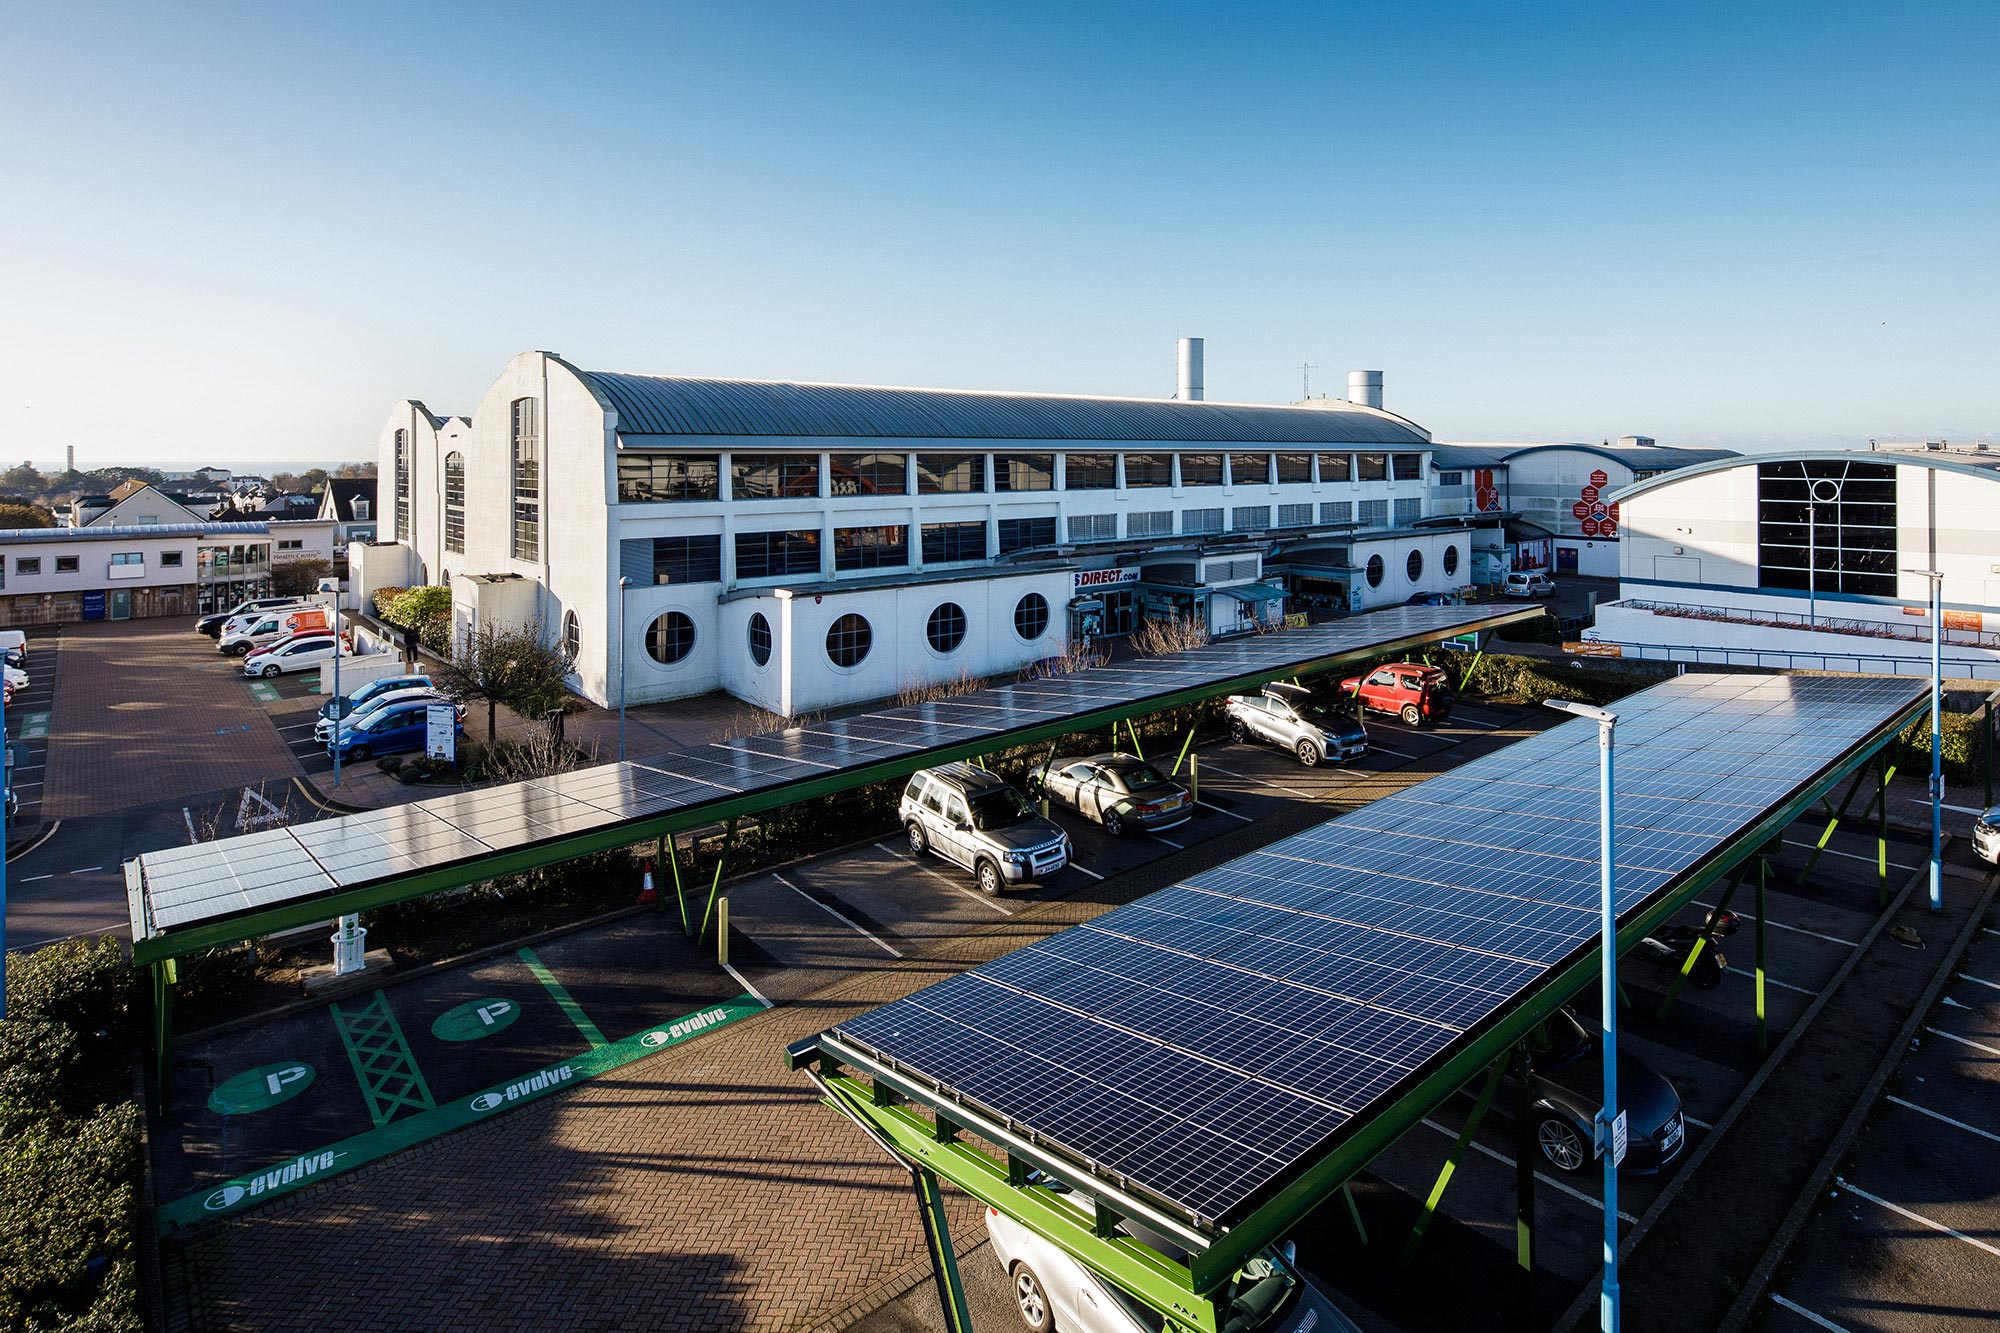 An aerial view of the solar array on the car ports at the powerhouse.